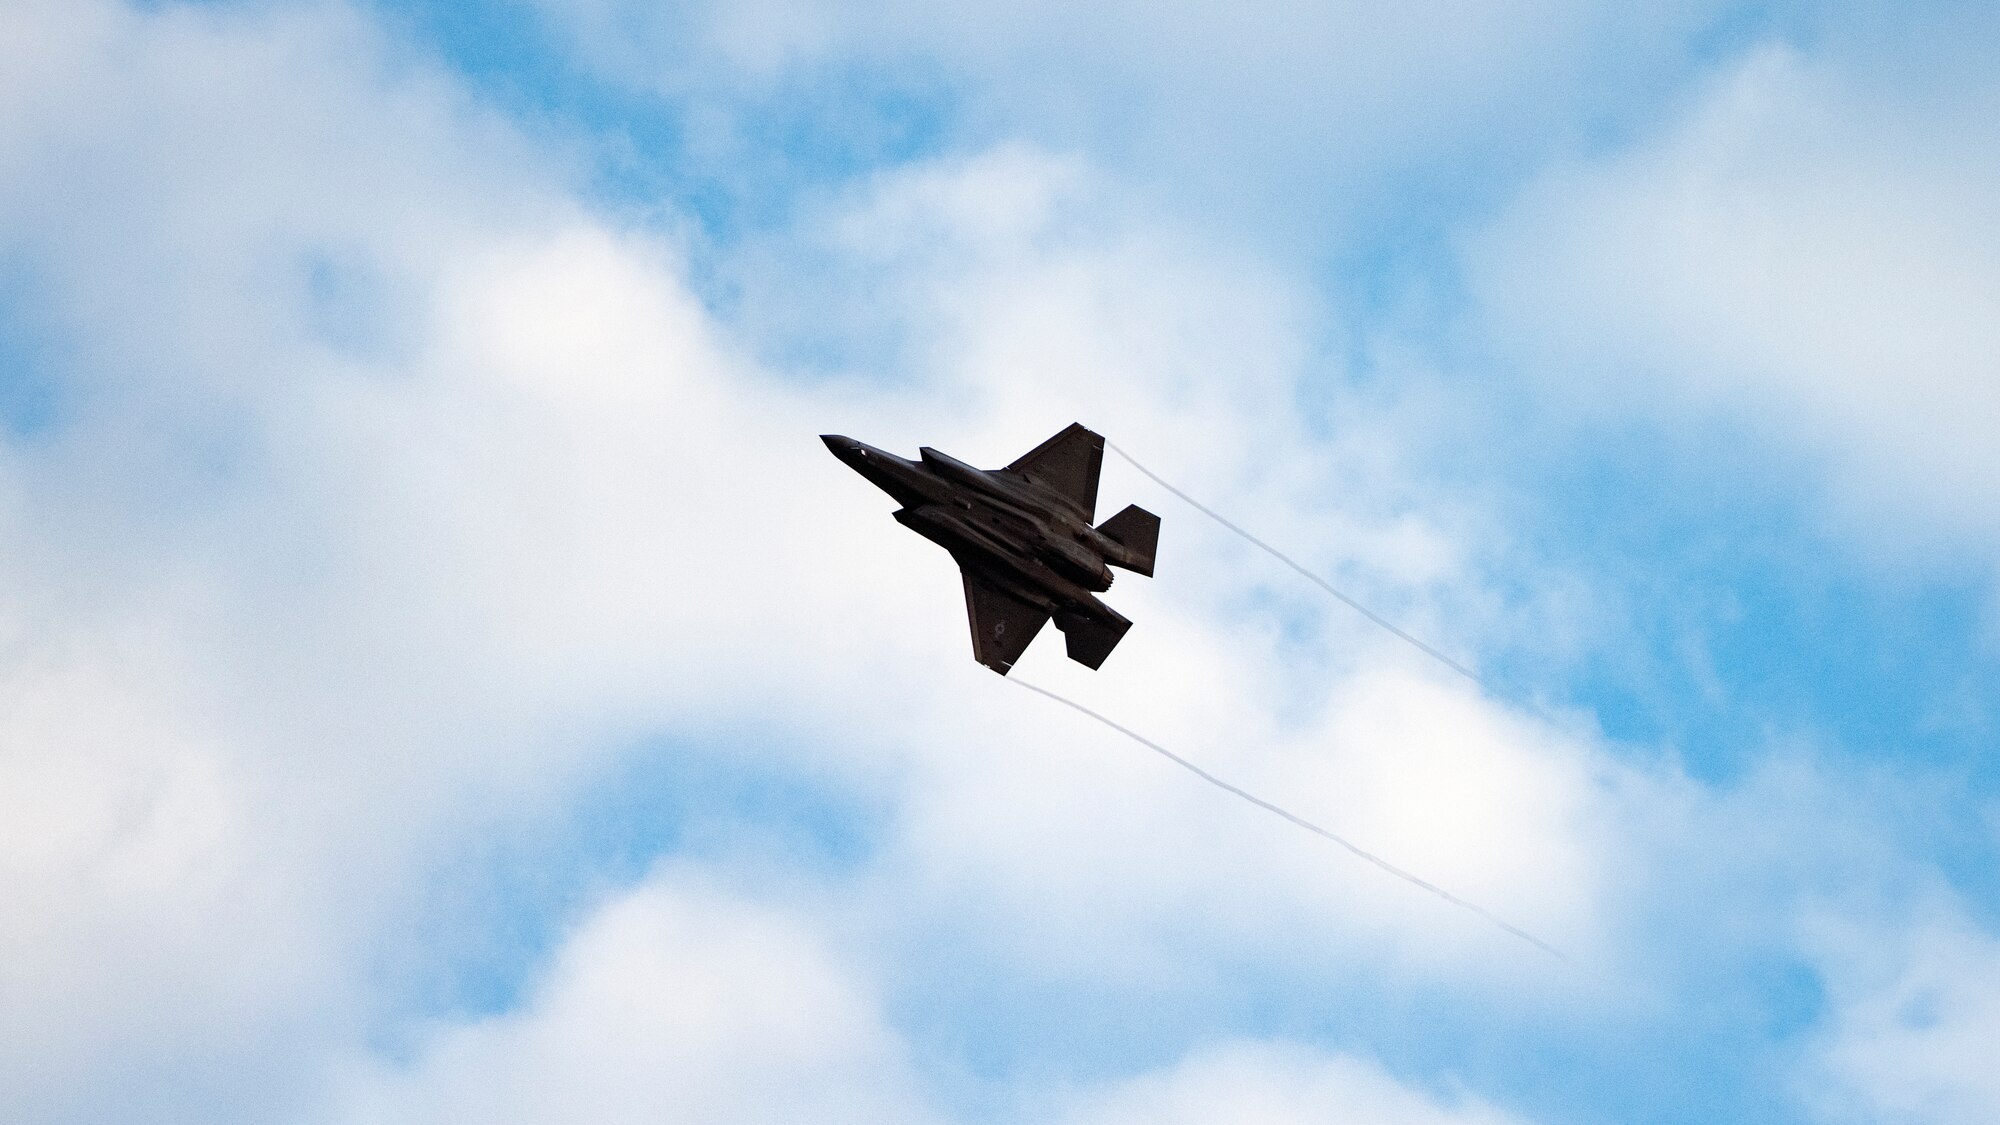 A U.S. Air Force F-35A Lightning II fifth generation fighter aircraft, assigned to the Vermont Air National Guard’s 158th Fighter Wing, flies above Spangdahlem Air Base, Germany, as they prepare to take over for Hill Air Force Base’s 388th Fighter Wing May 02, 2022. U.S. European Command’s ability to rotate between units maintains readiness and morale across the force,  while displaying the U.S. Air Force’s unique ability to integrate seamlessly between Active Duty, Air Force Reserve, and Air National Guard components. (U.S. Air Force photo by Tech. Sgt. Anthony Plyler)